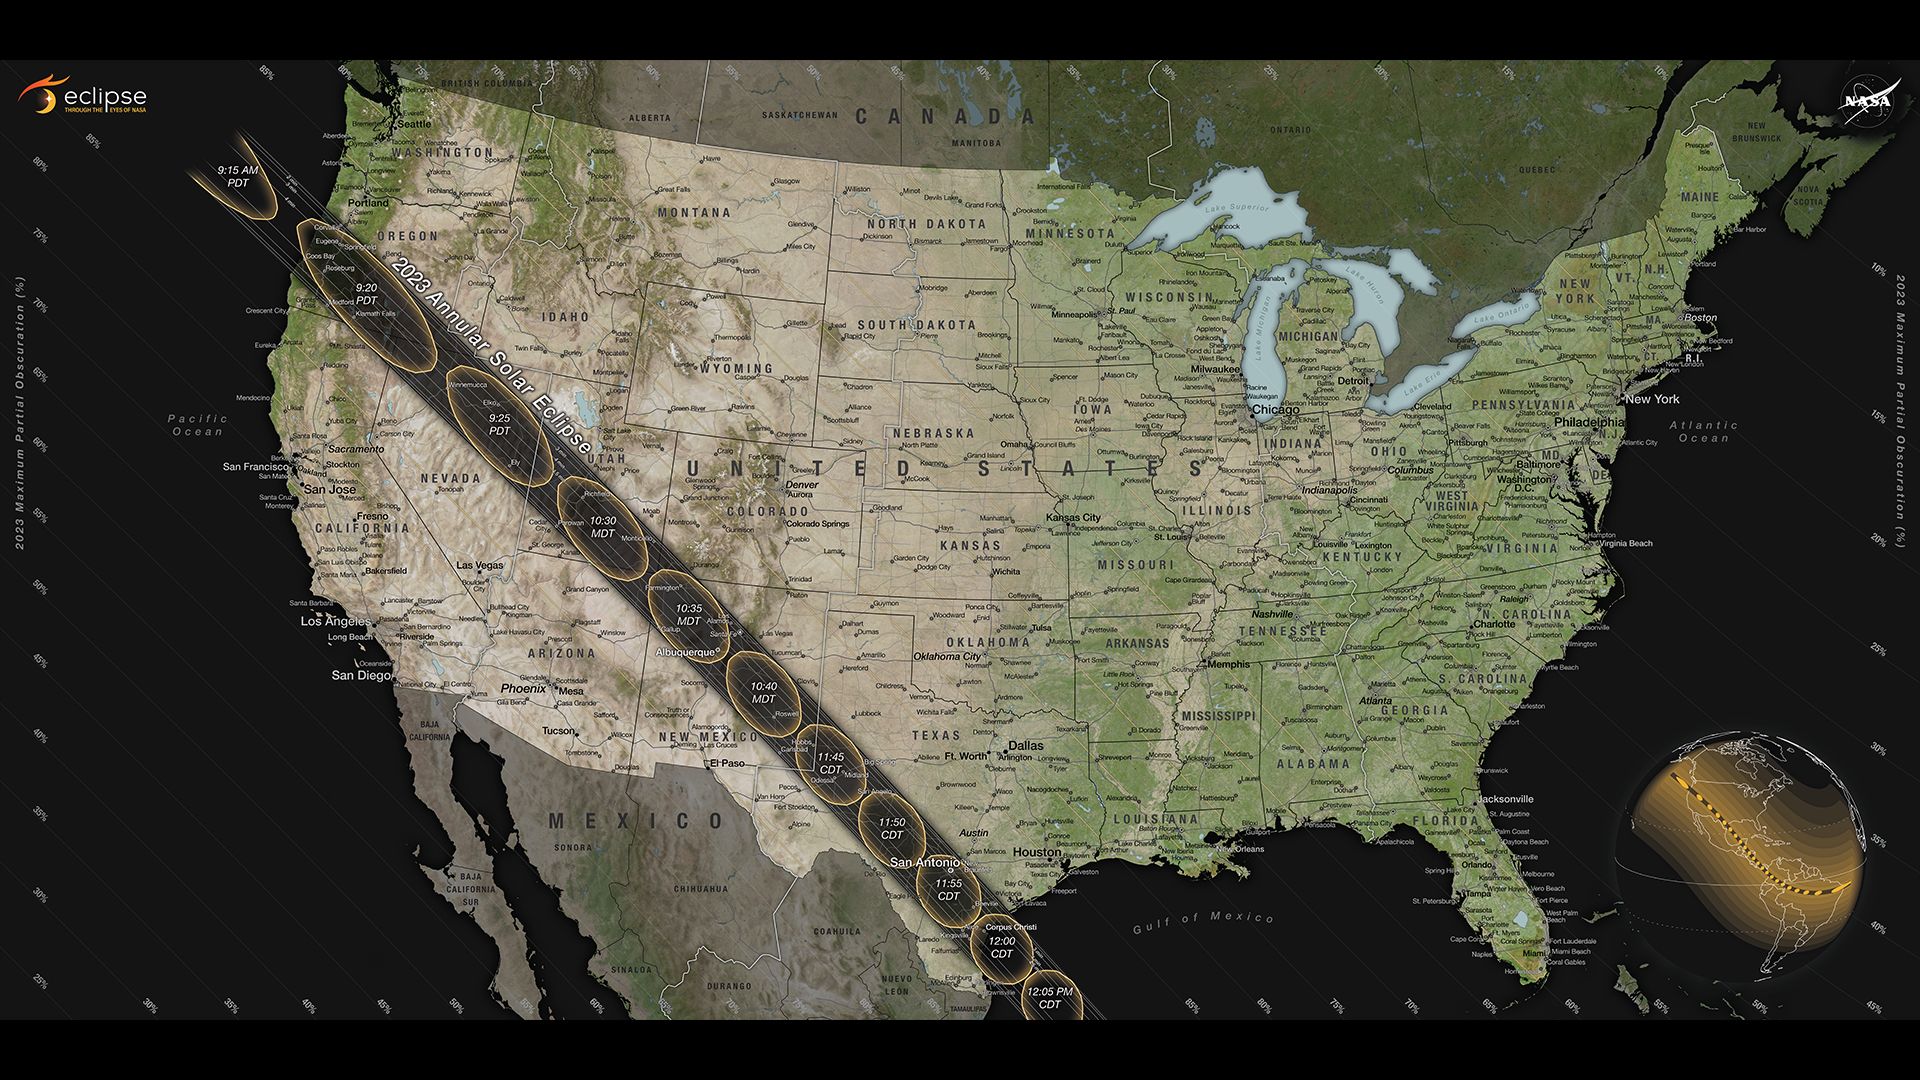 The path of annularity crossing the U.S. on October 14, 2023.